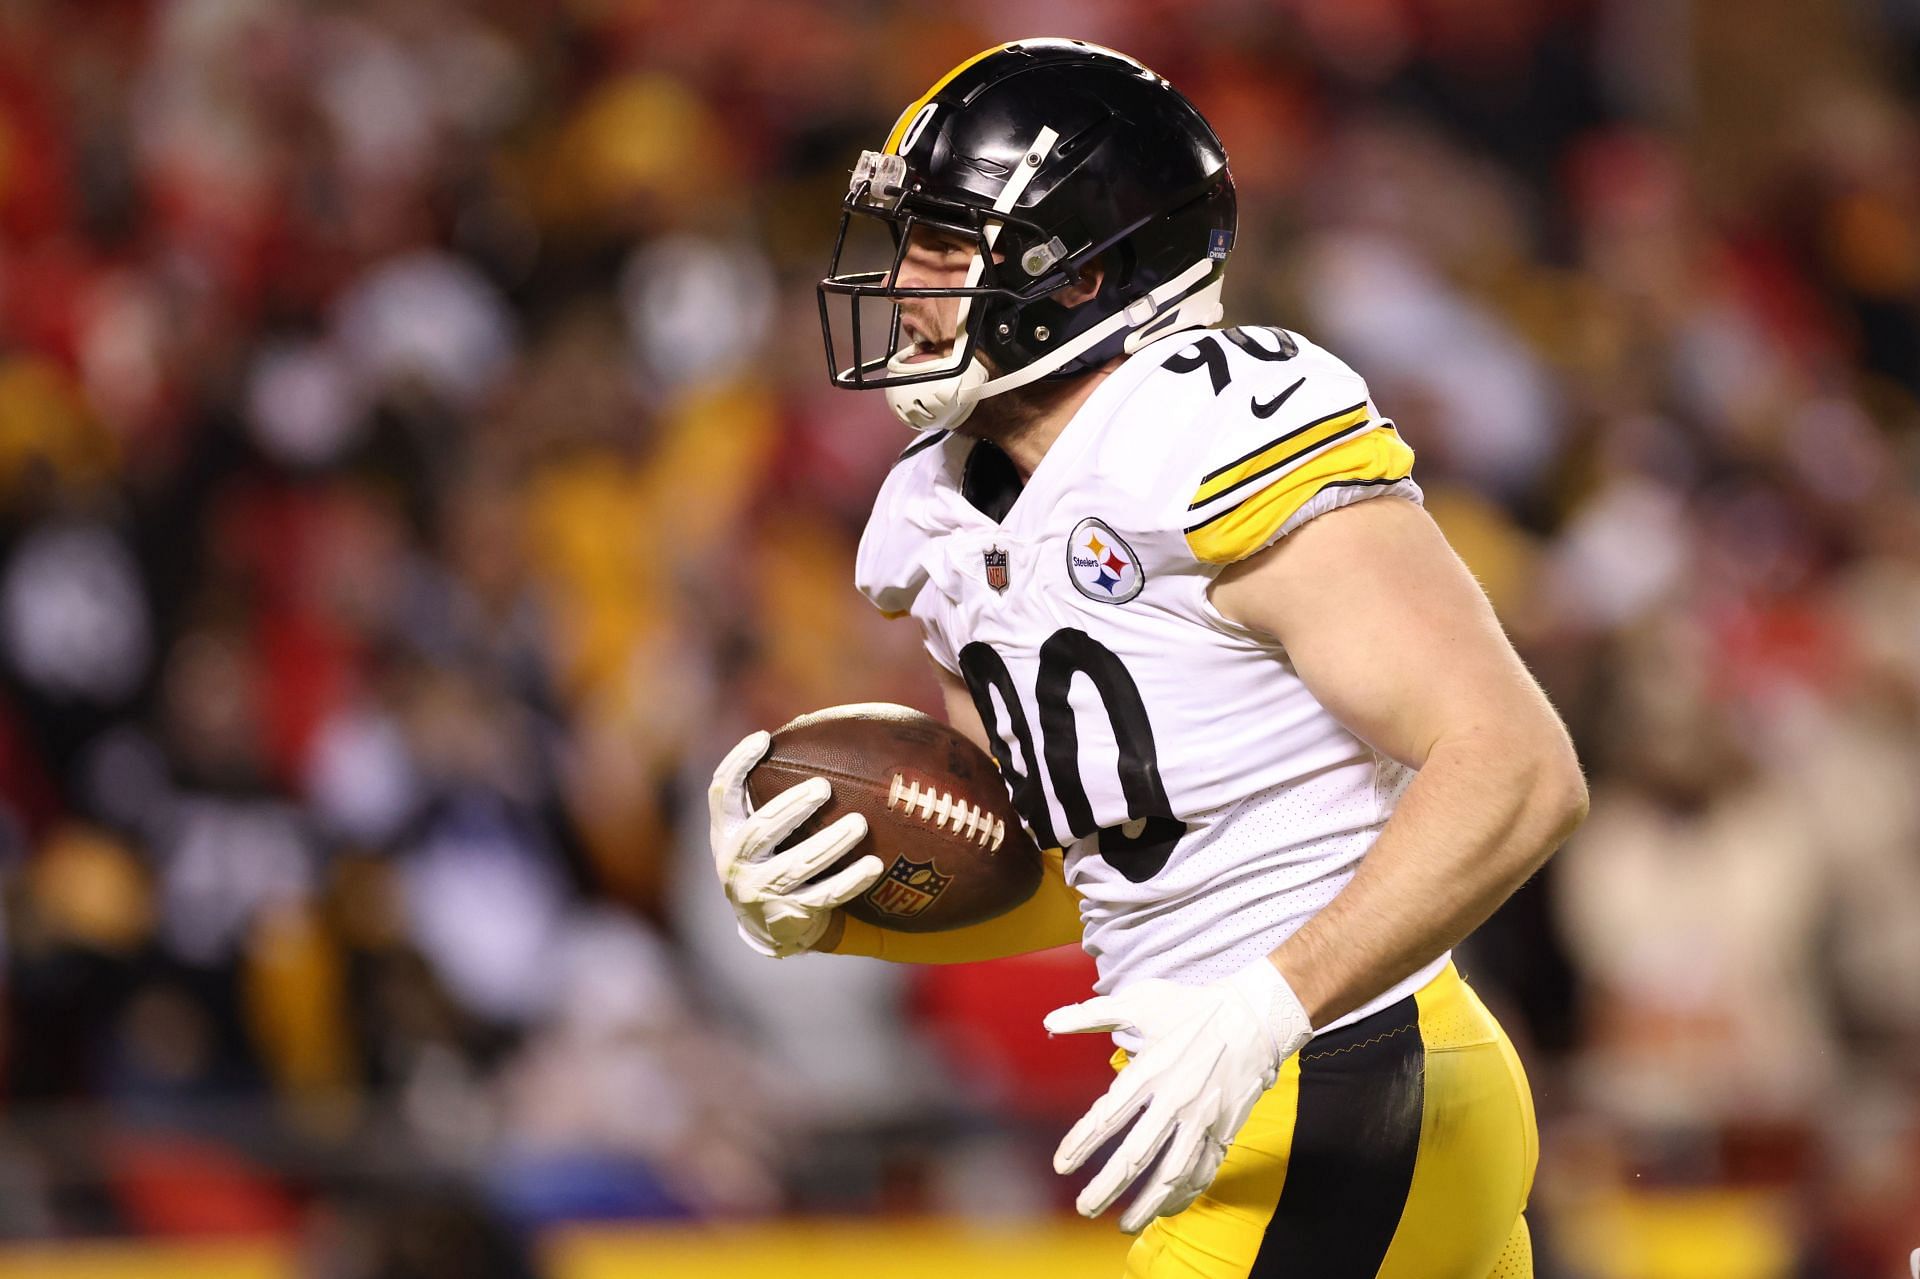 The Pittsburgh Steelers could potentially lose T.J. Watt for a prolonged period.